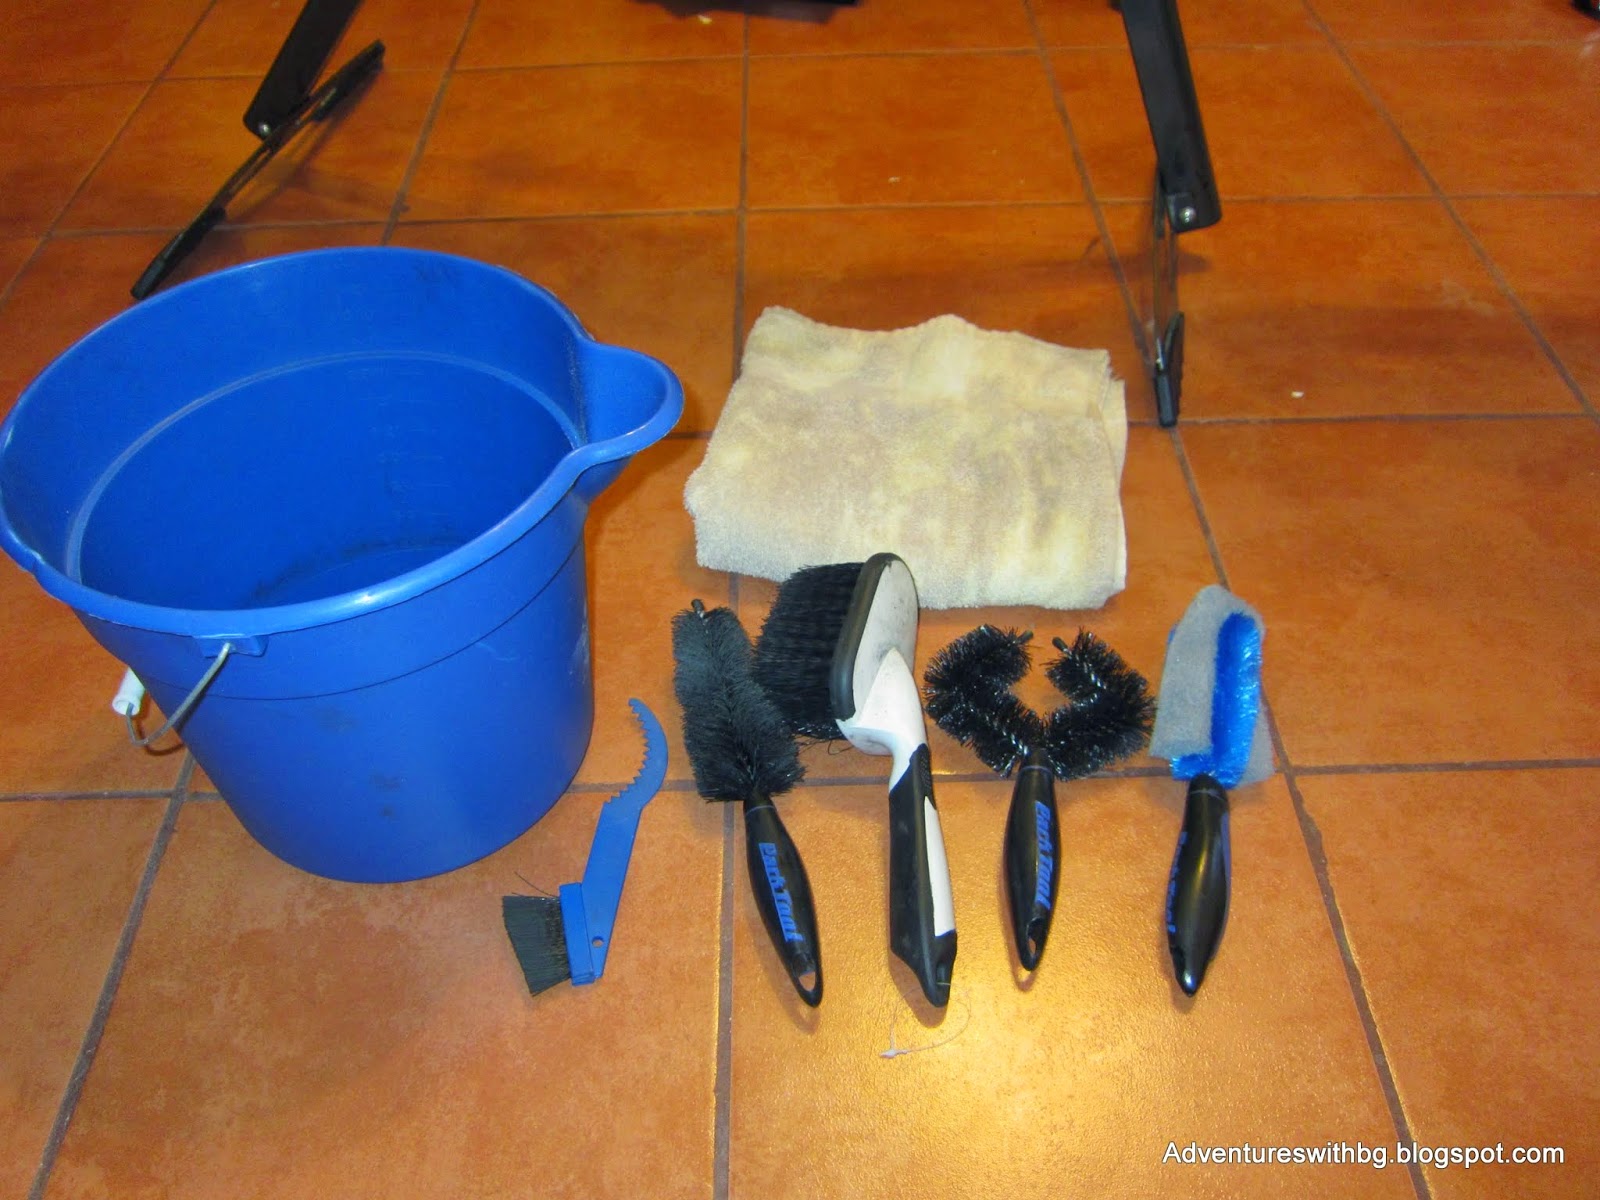 The supplies I use to clean my bike